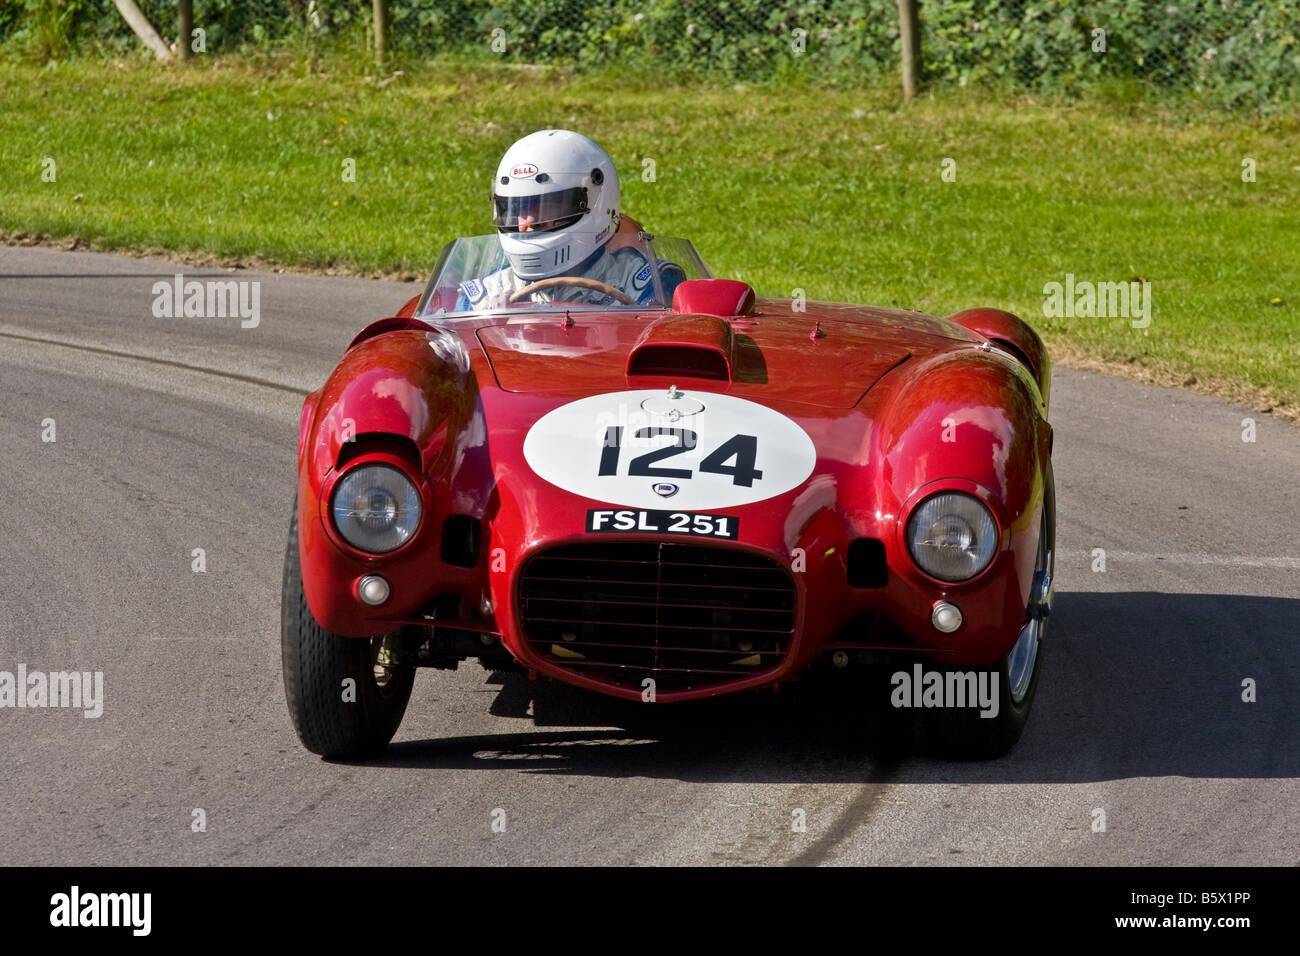 1954 type Lancia D24 Le Mans racer with driver Anthony MacLean at Goodwood Festival of Speed, Sussex, UK. Stock Photo